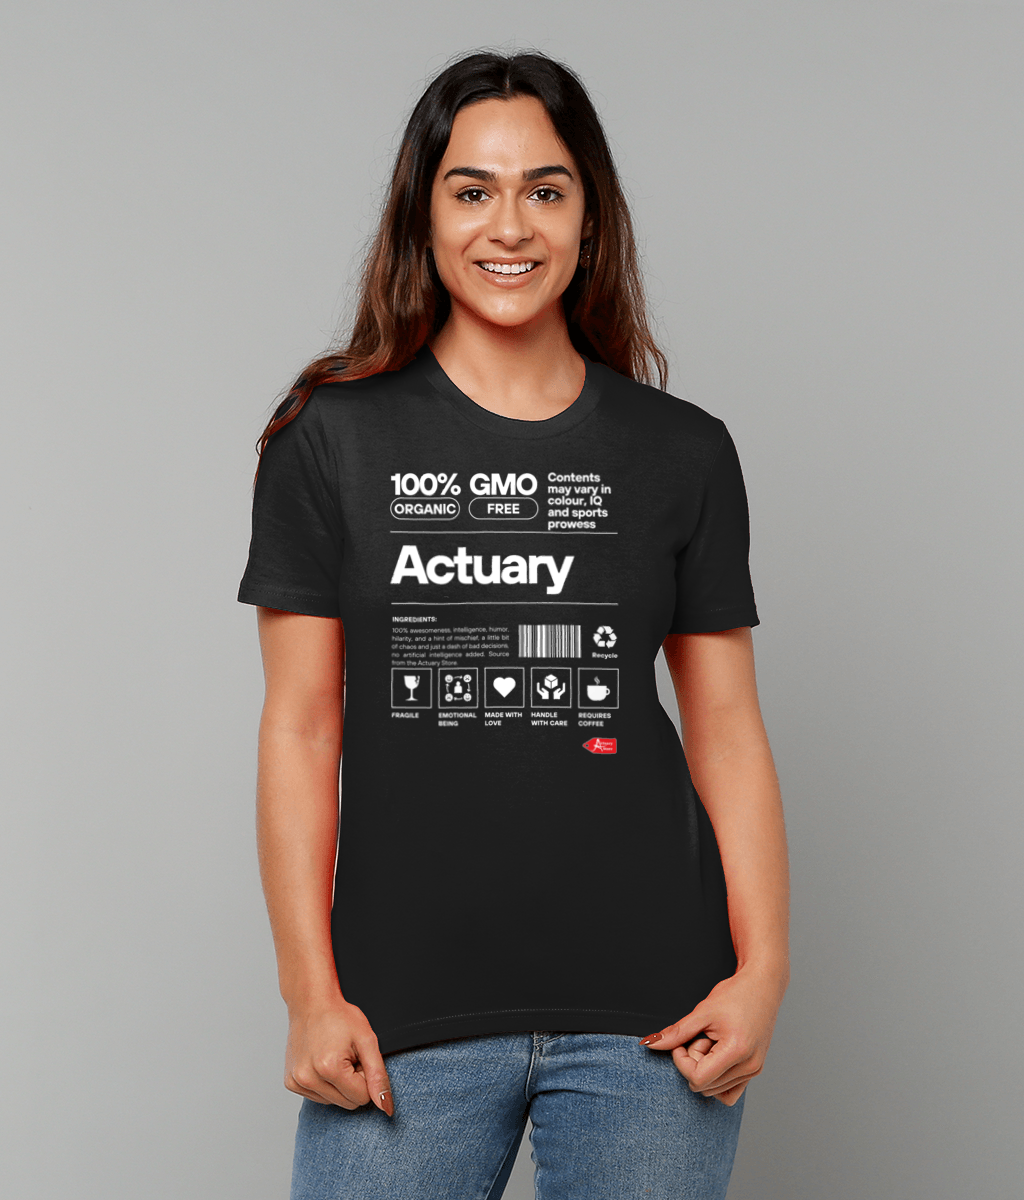 Actuary Nutrition Label Typography T-Shirt